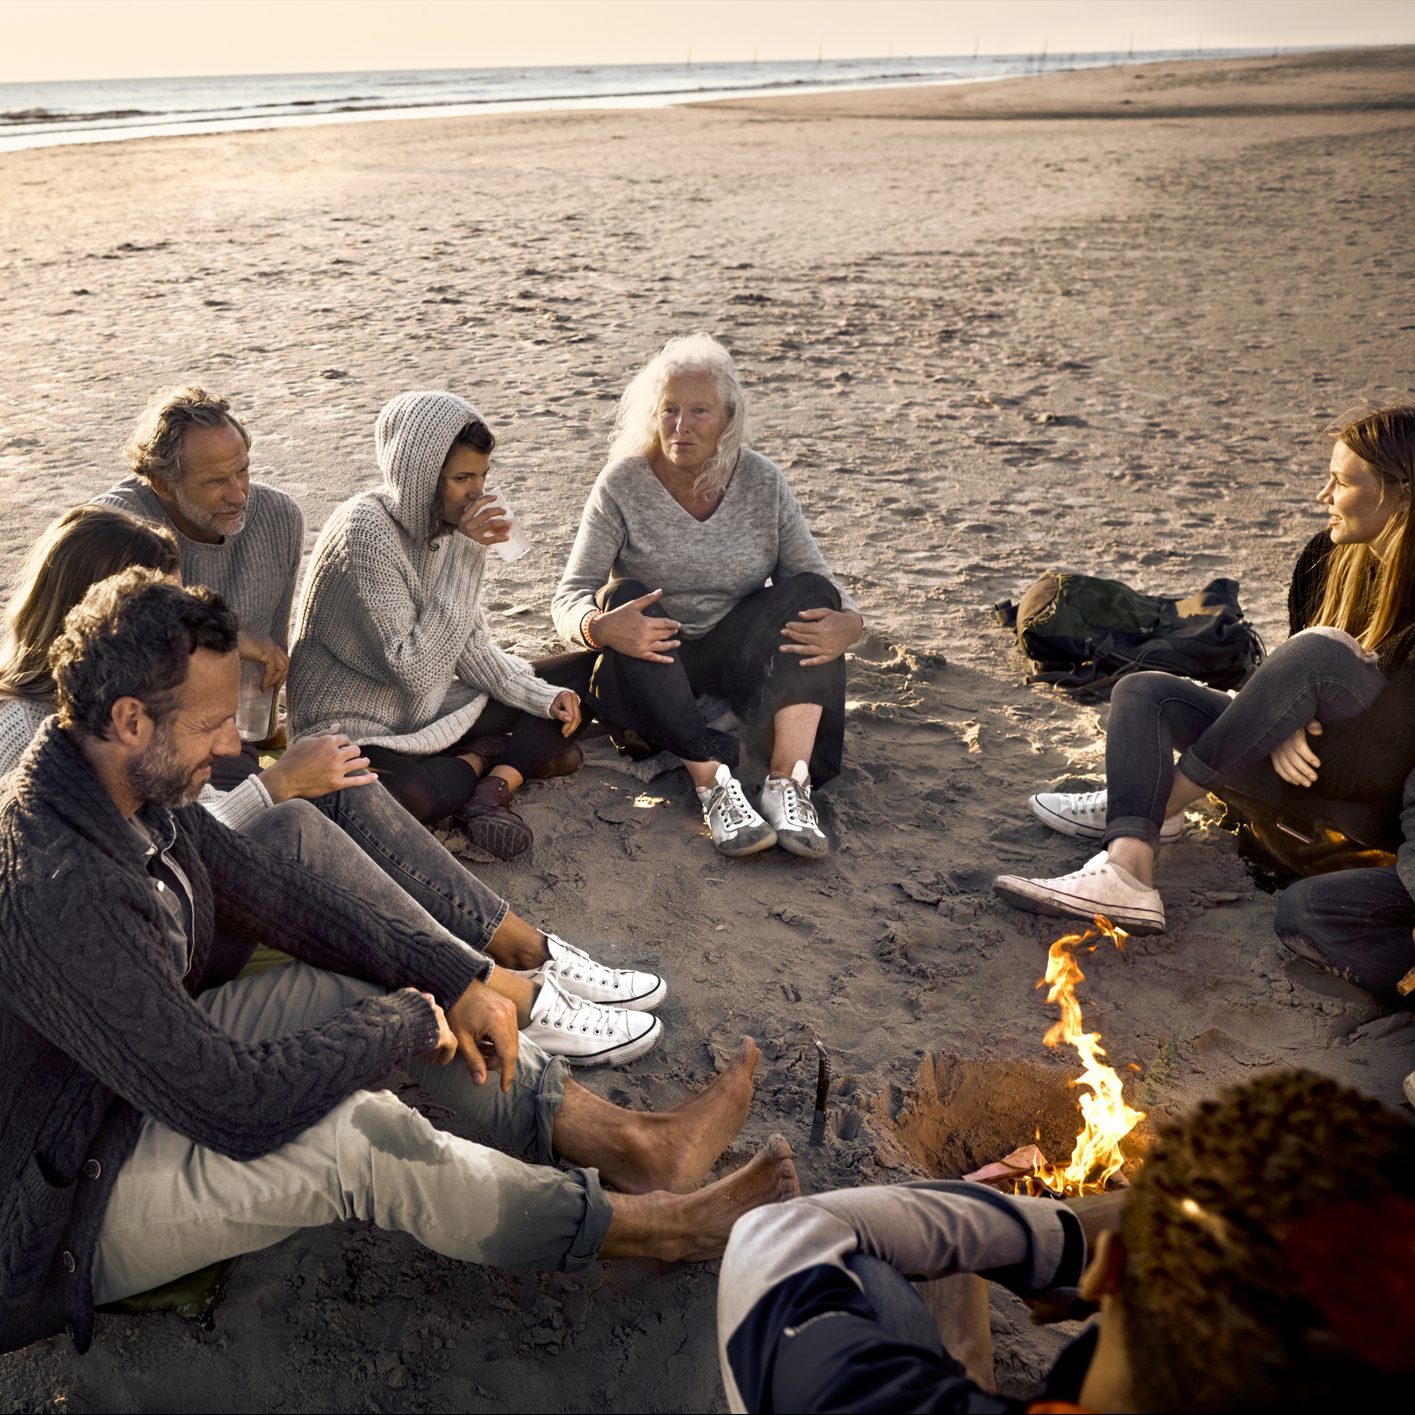 Family and friends sitting around campfire on the beach at sunset